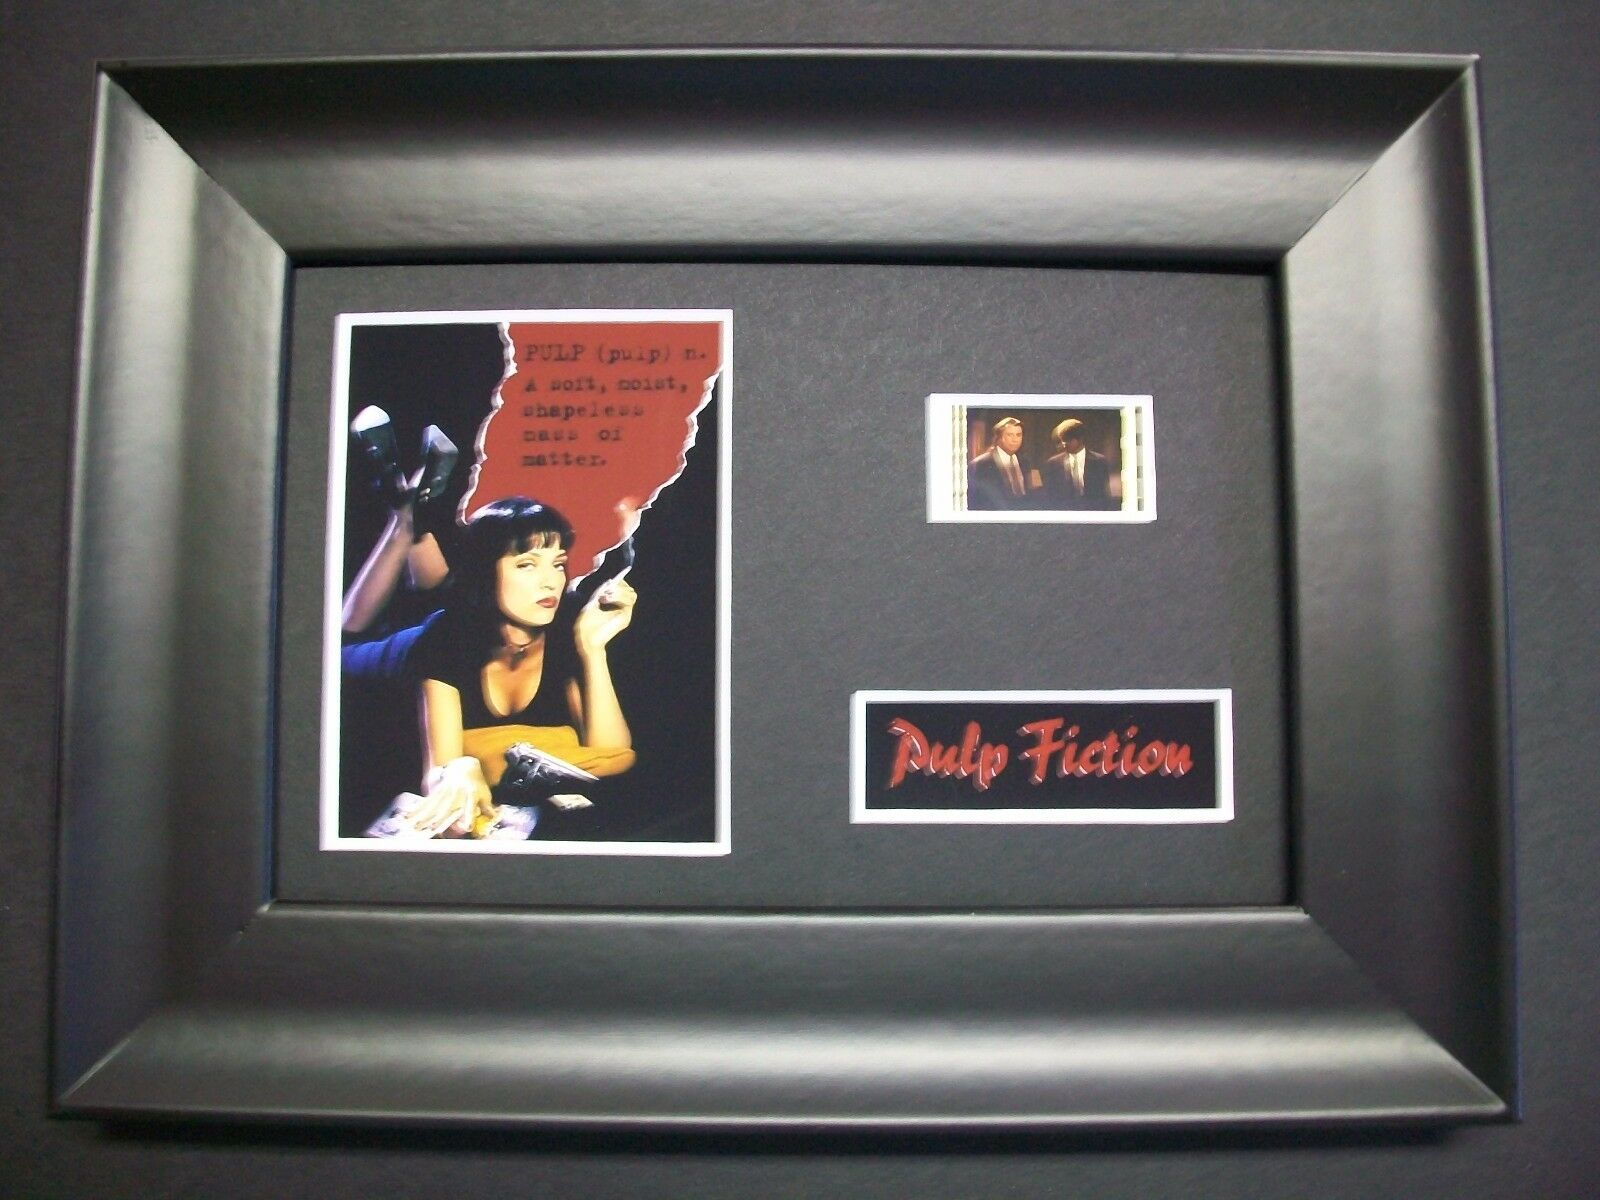 Pulp Fiction Framed Movie Film Cell Memorabilia - Compliments Dvd Poster Book